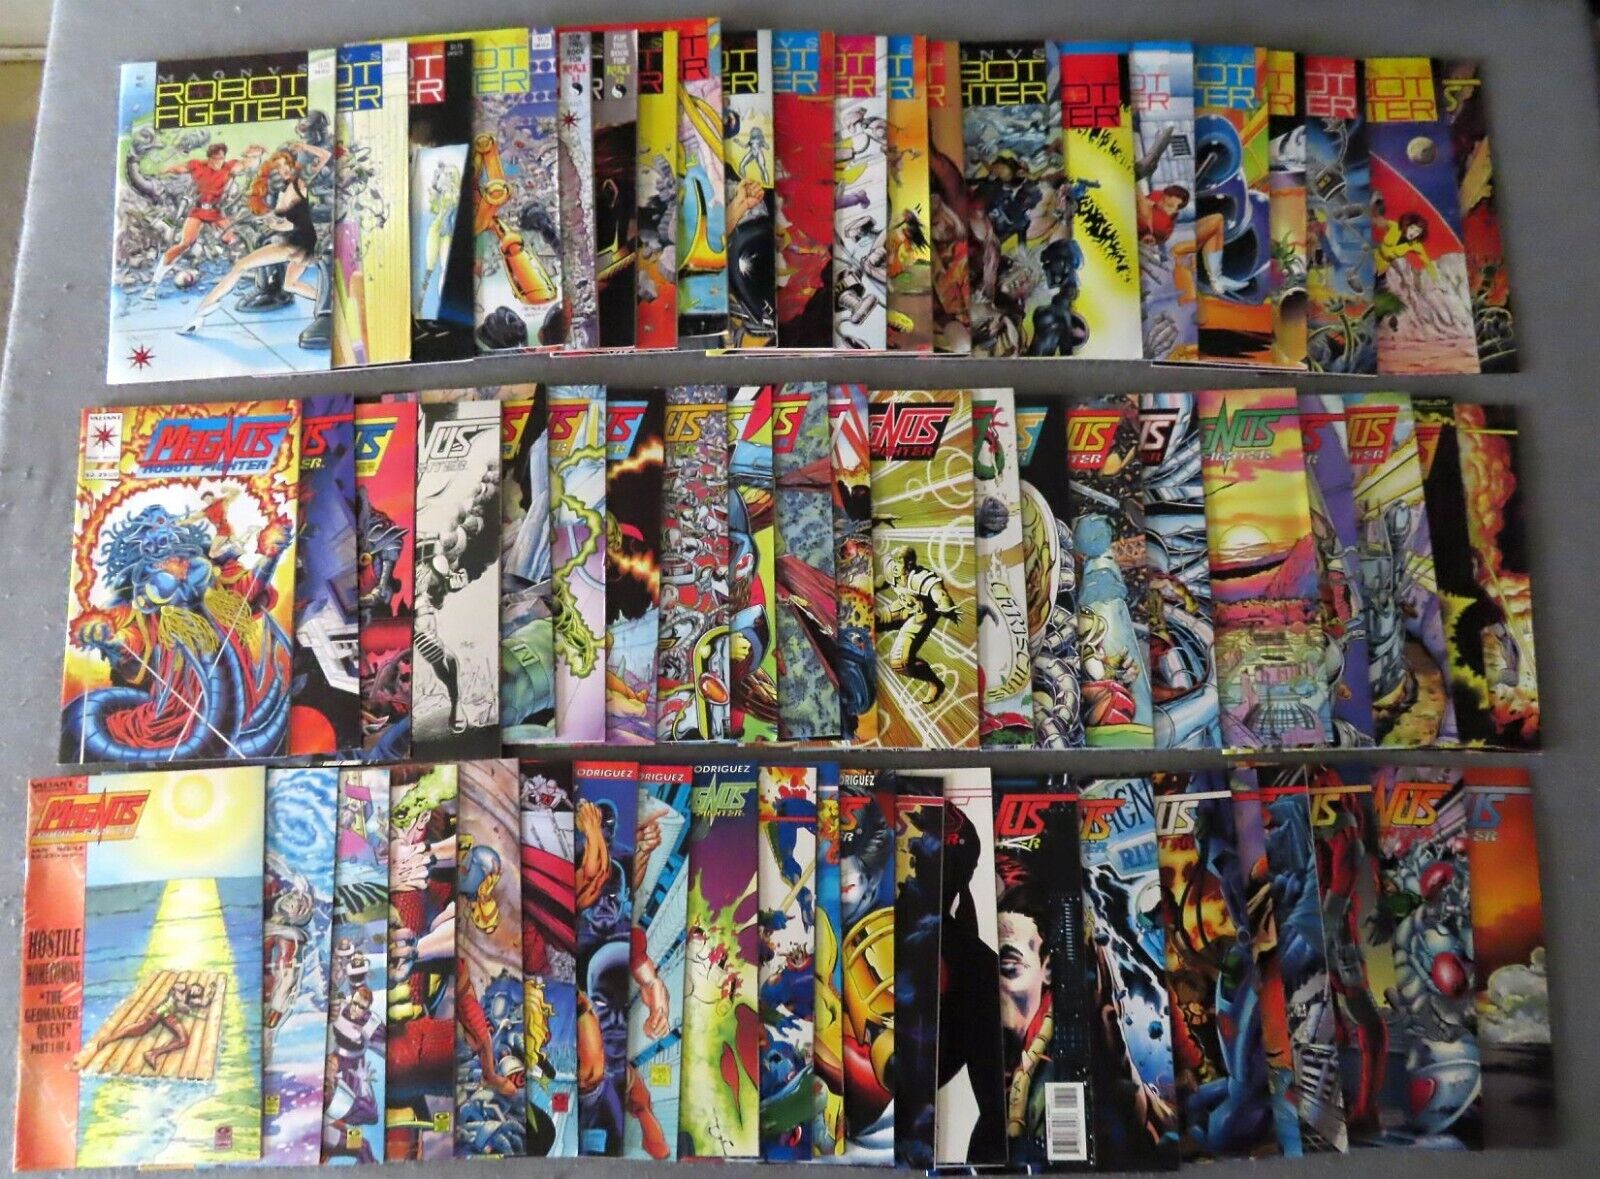 MAGNUS ROBOT FIGHTER (Valiant/1991) Issues #1-64 Complete Set +4 Extras